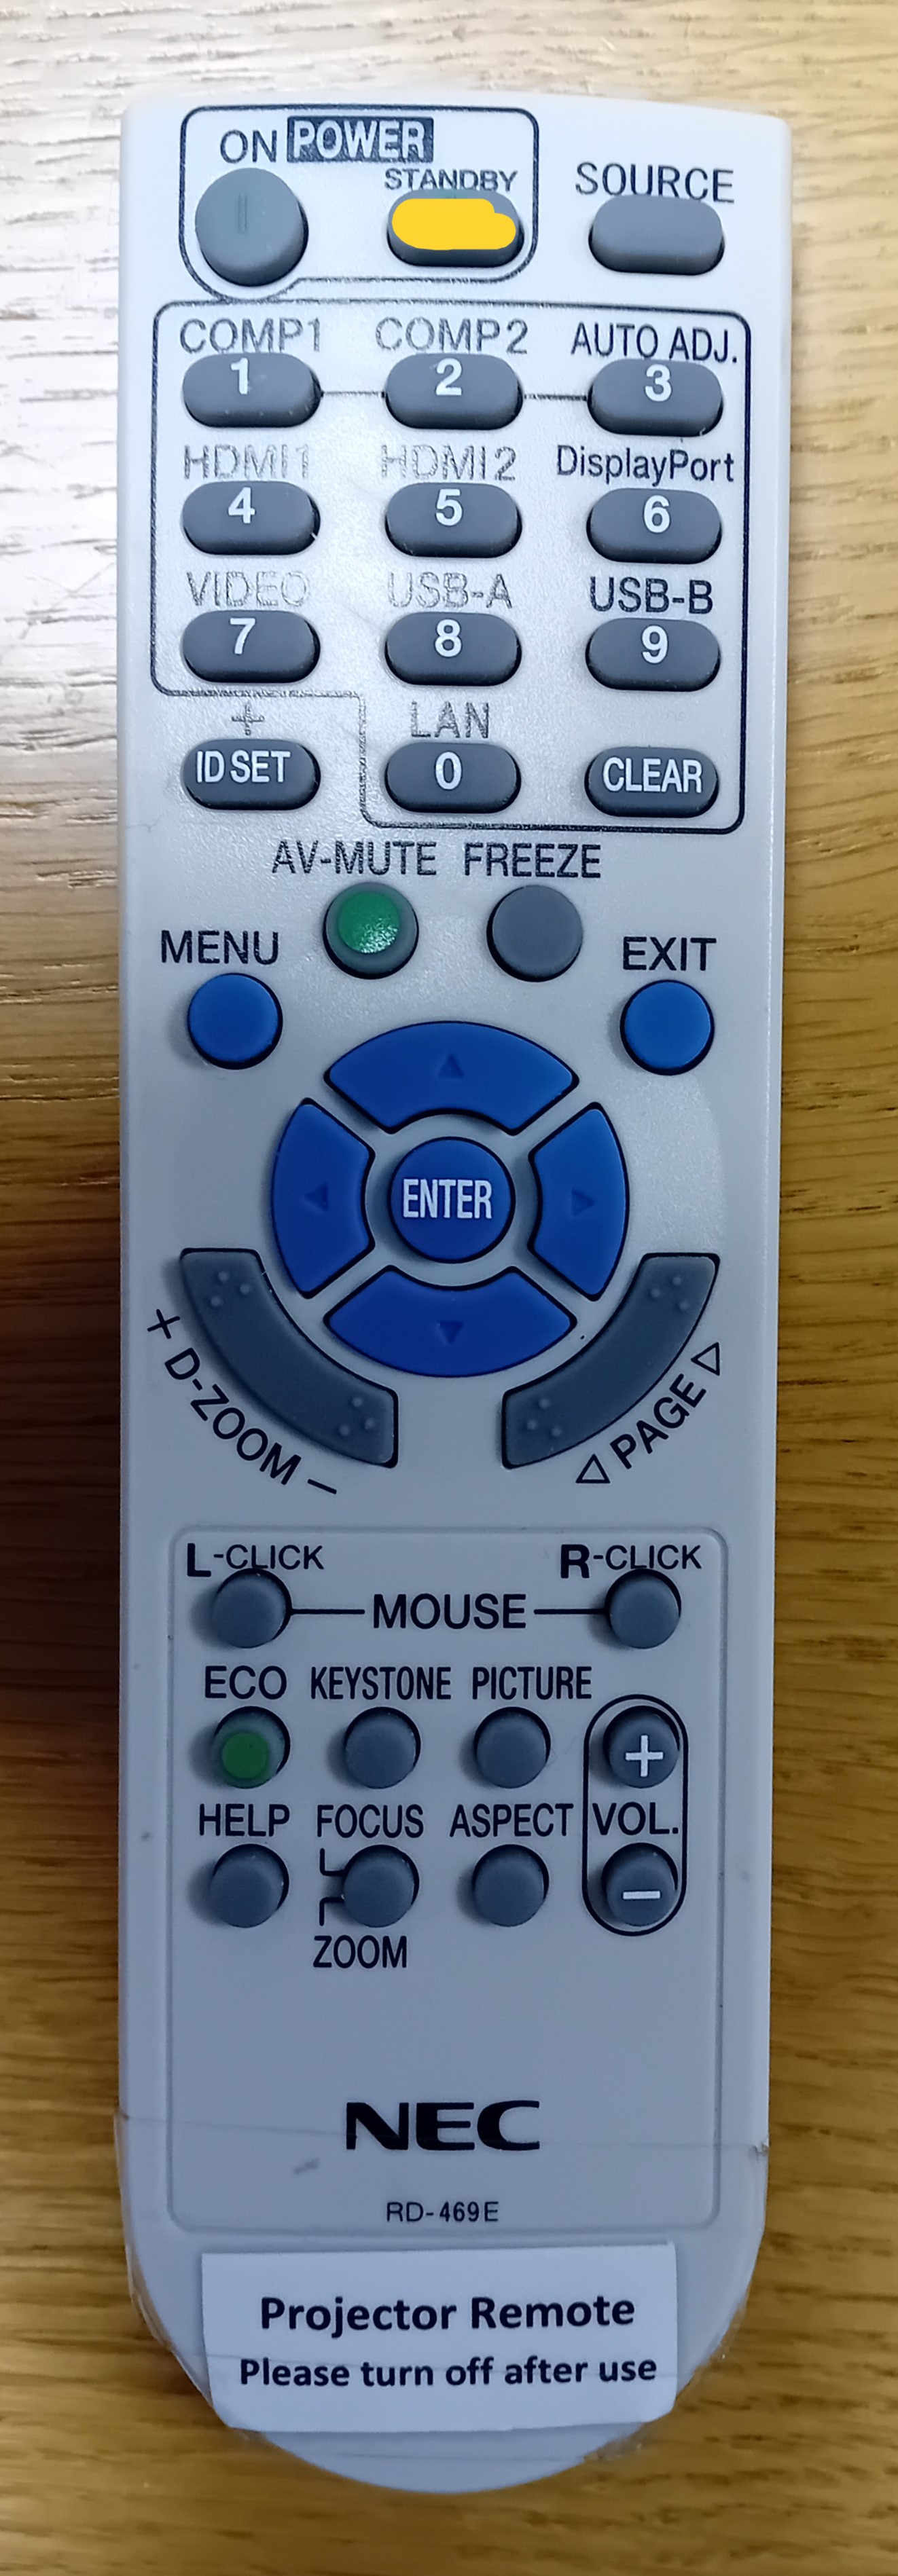 Remote for projector, showing standby button